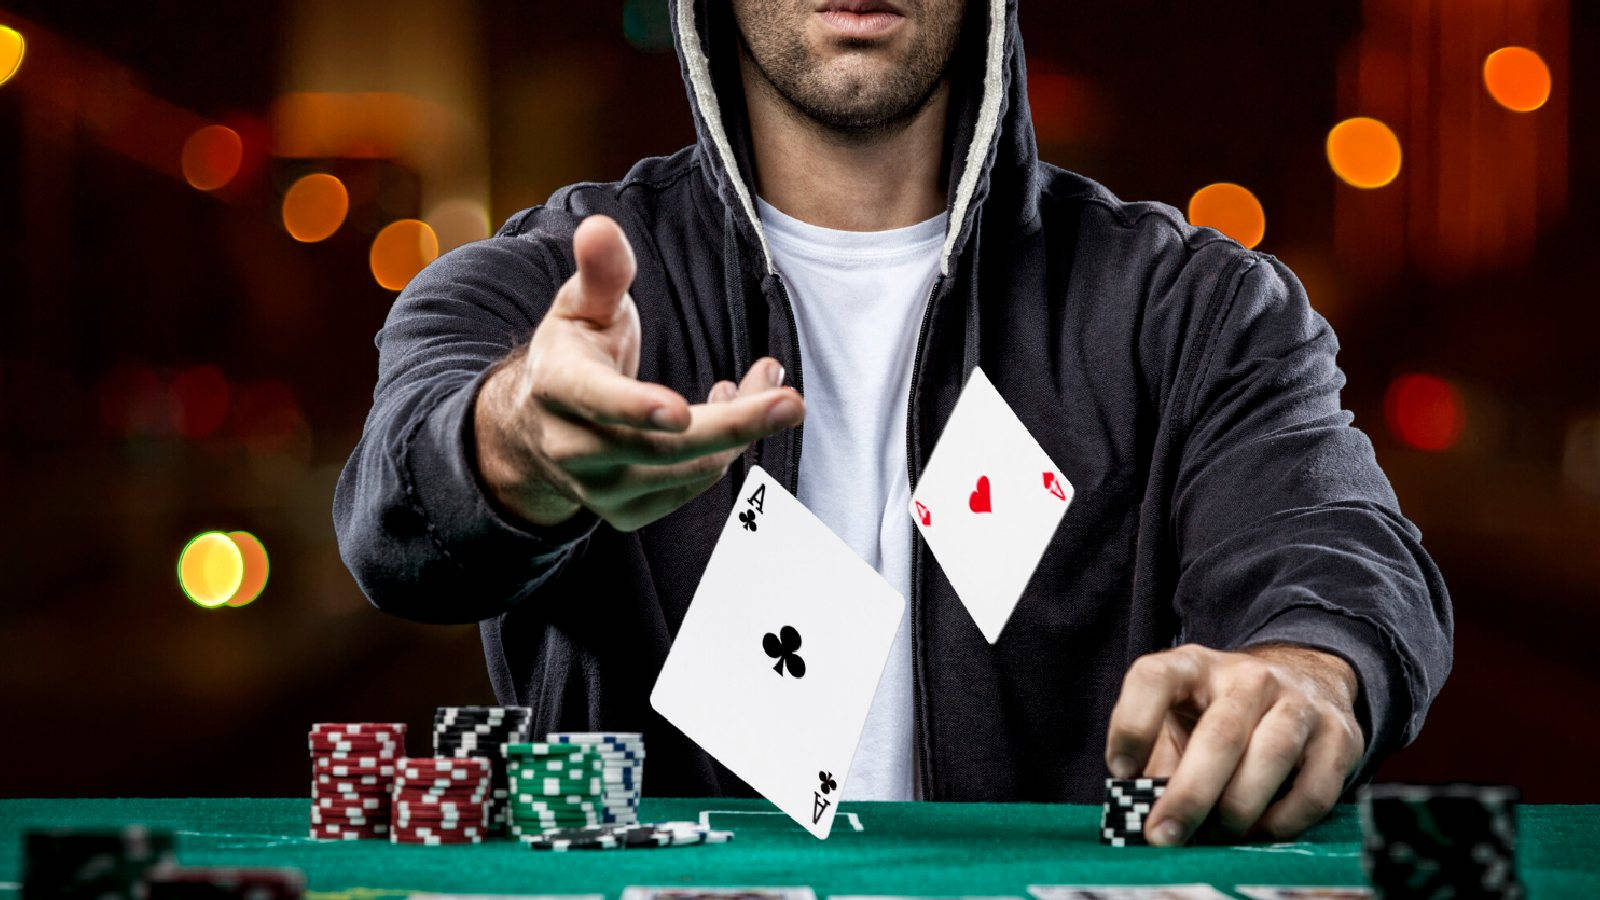 Poker Player Showing Pair Of Aces In Baccarat Game Wallpaper